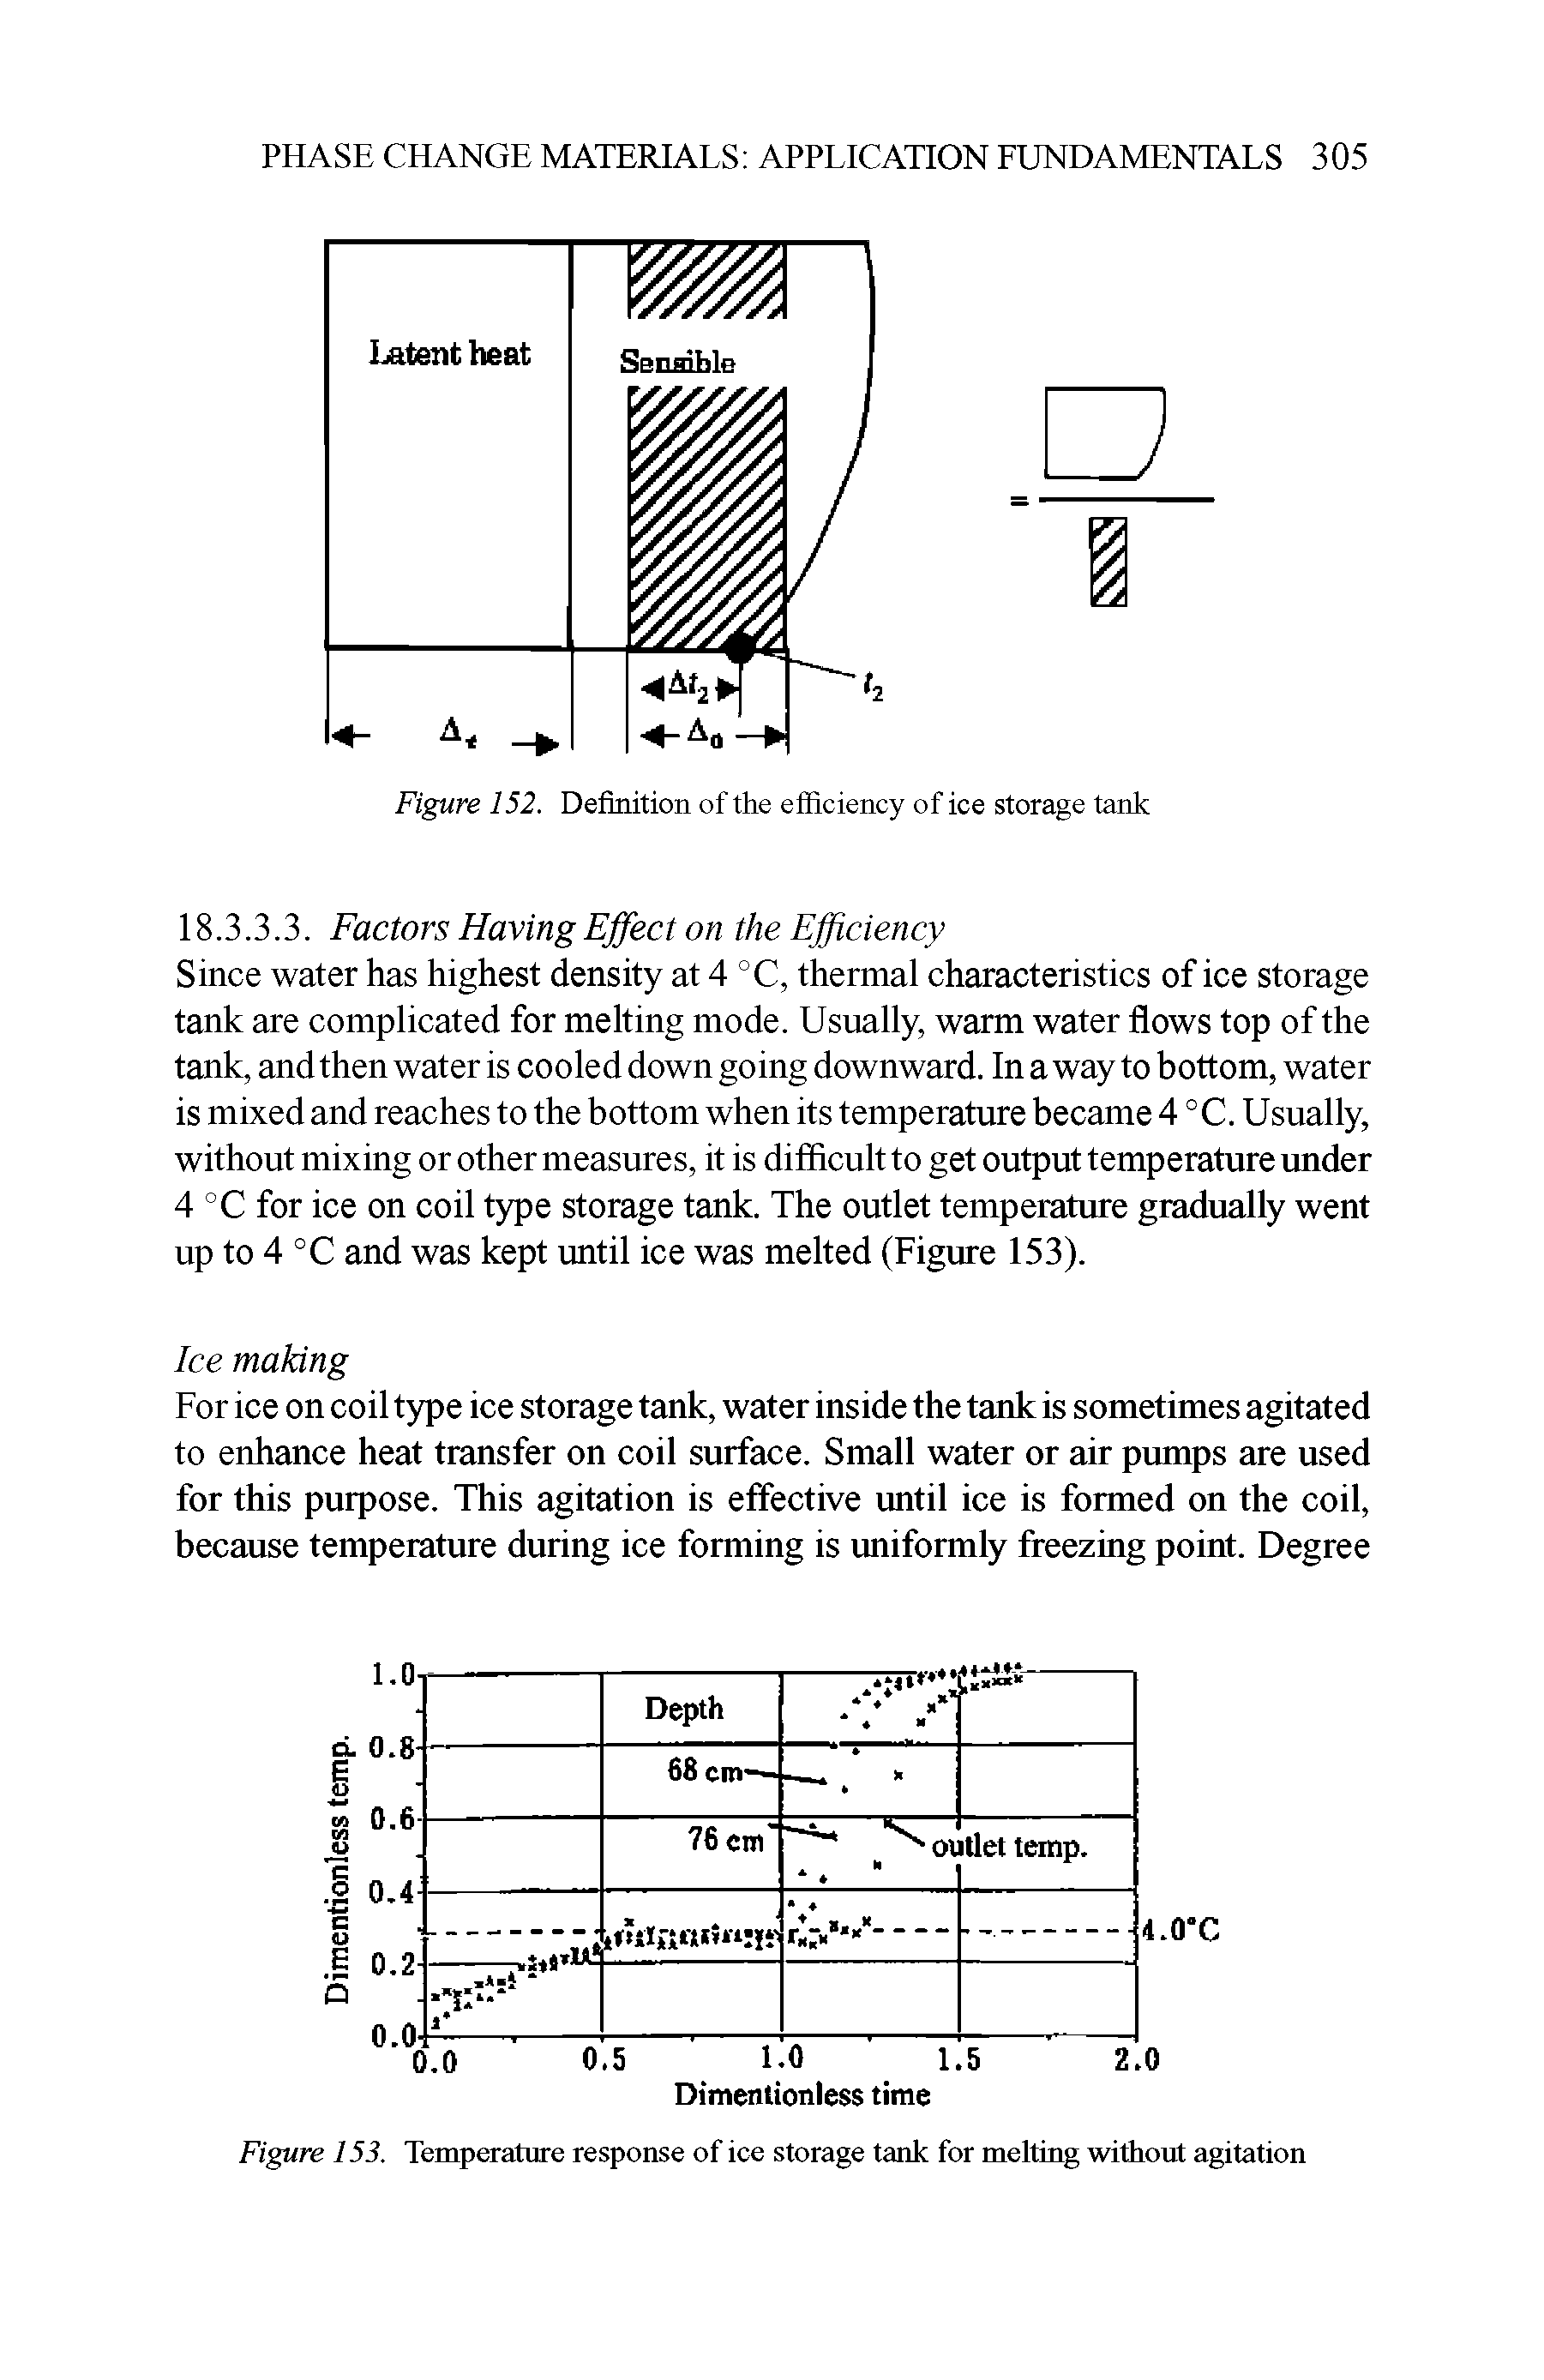 Figure 153. Temperature response of ice storage tank for melting without agitation...